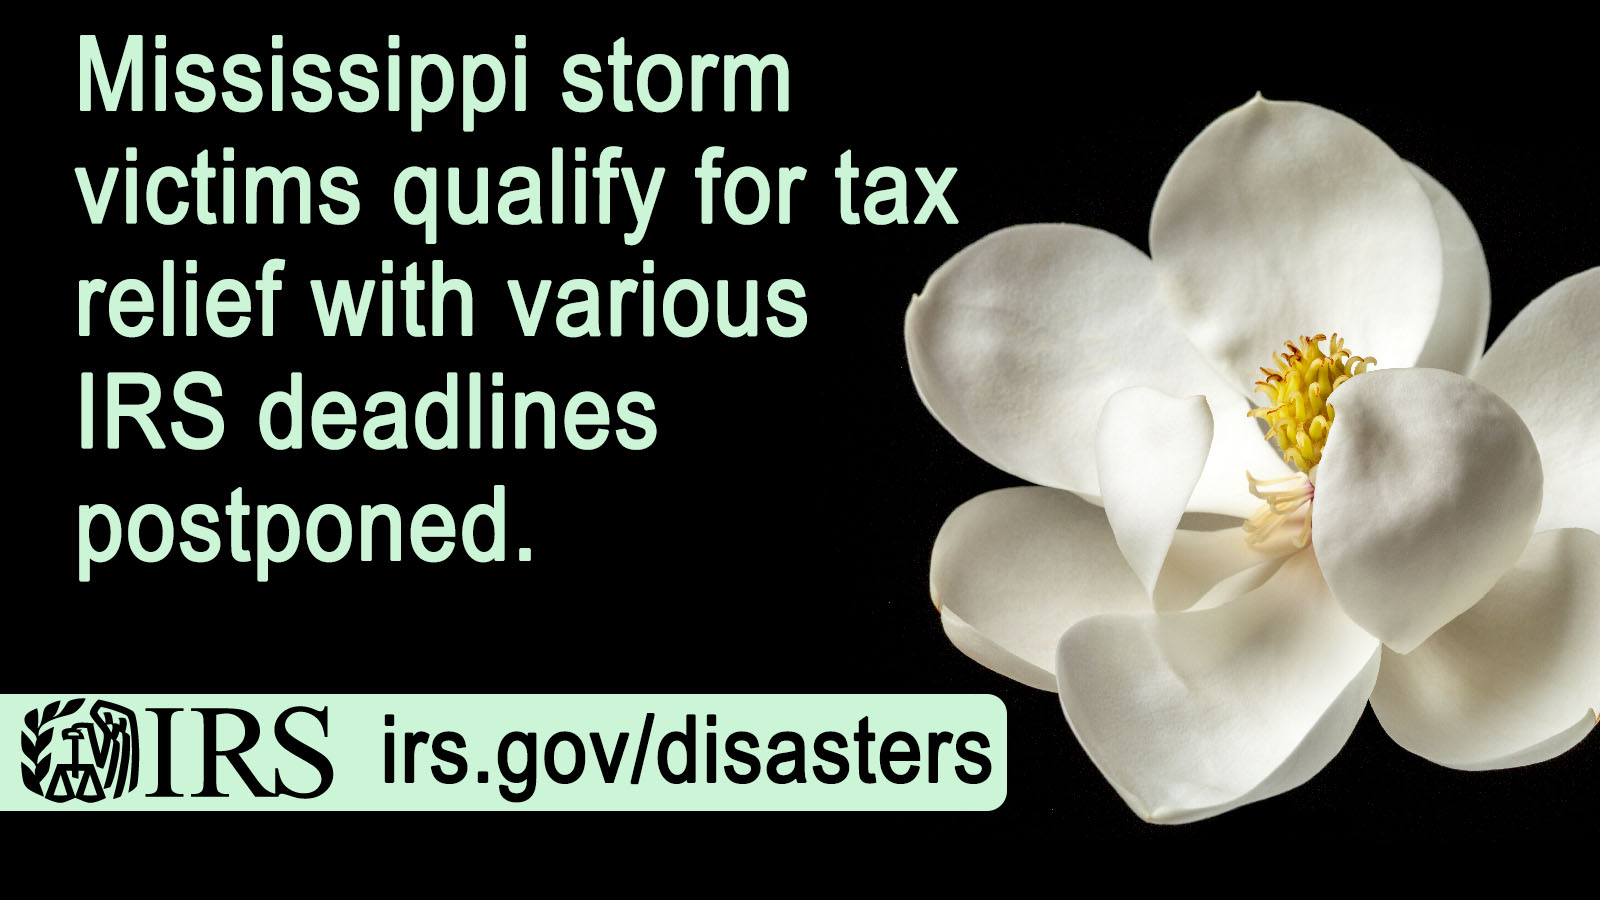 A Magnolia, the State Flower of Mississippi, over a black background.  Text: Mississippi storm victims qualify for tax relief with various IRS deadlines postponed. IRS logo. Irs.gov/disasters